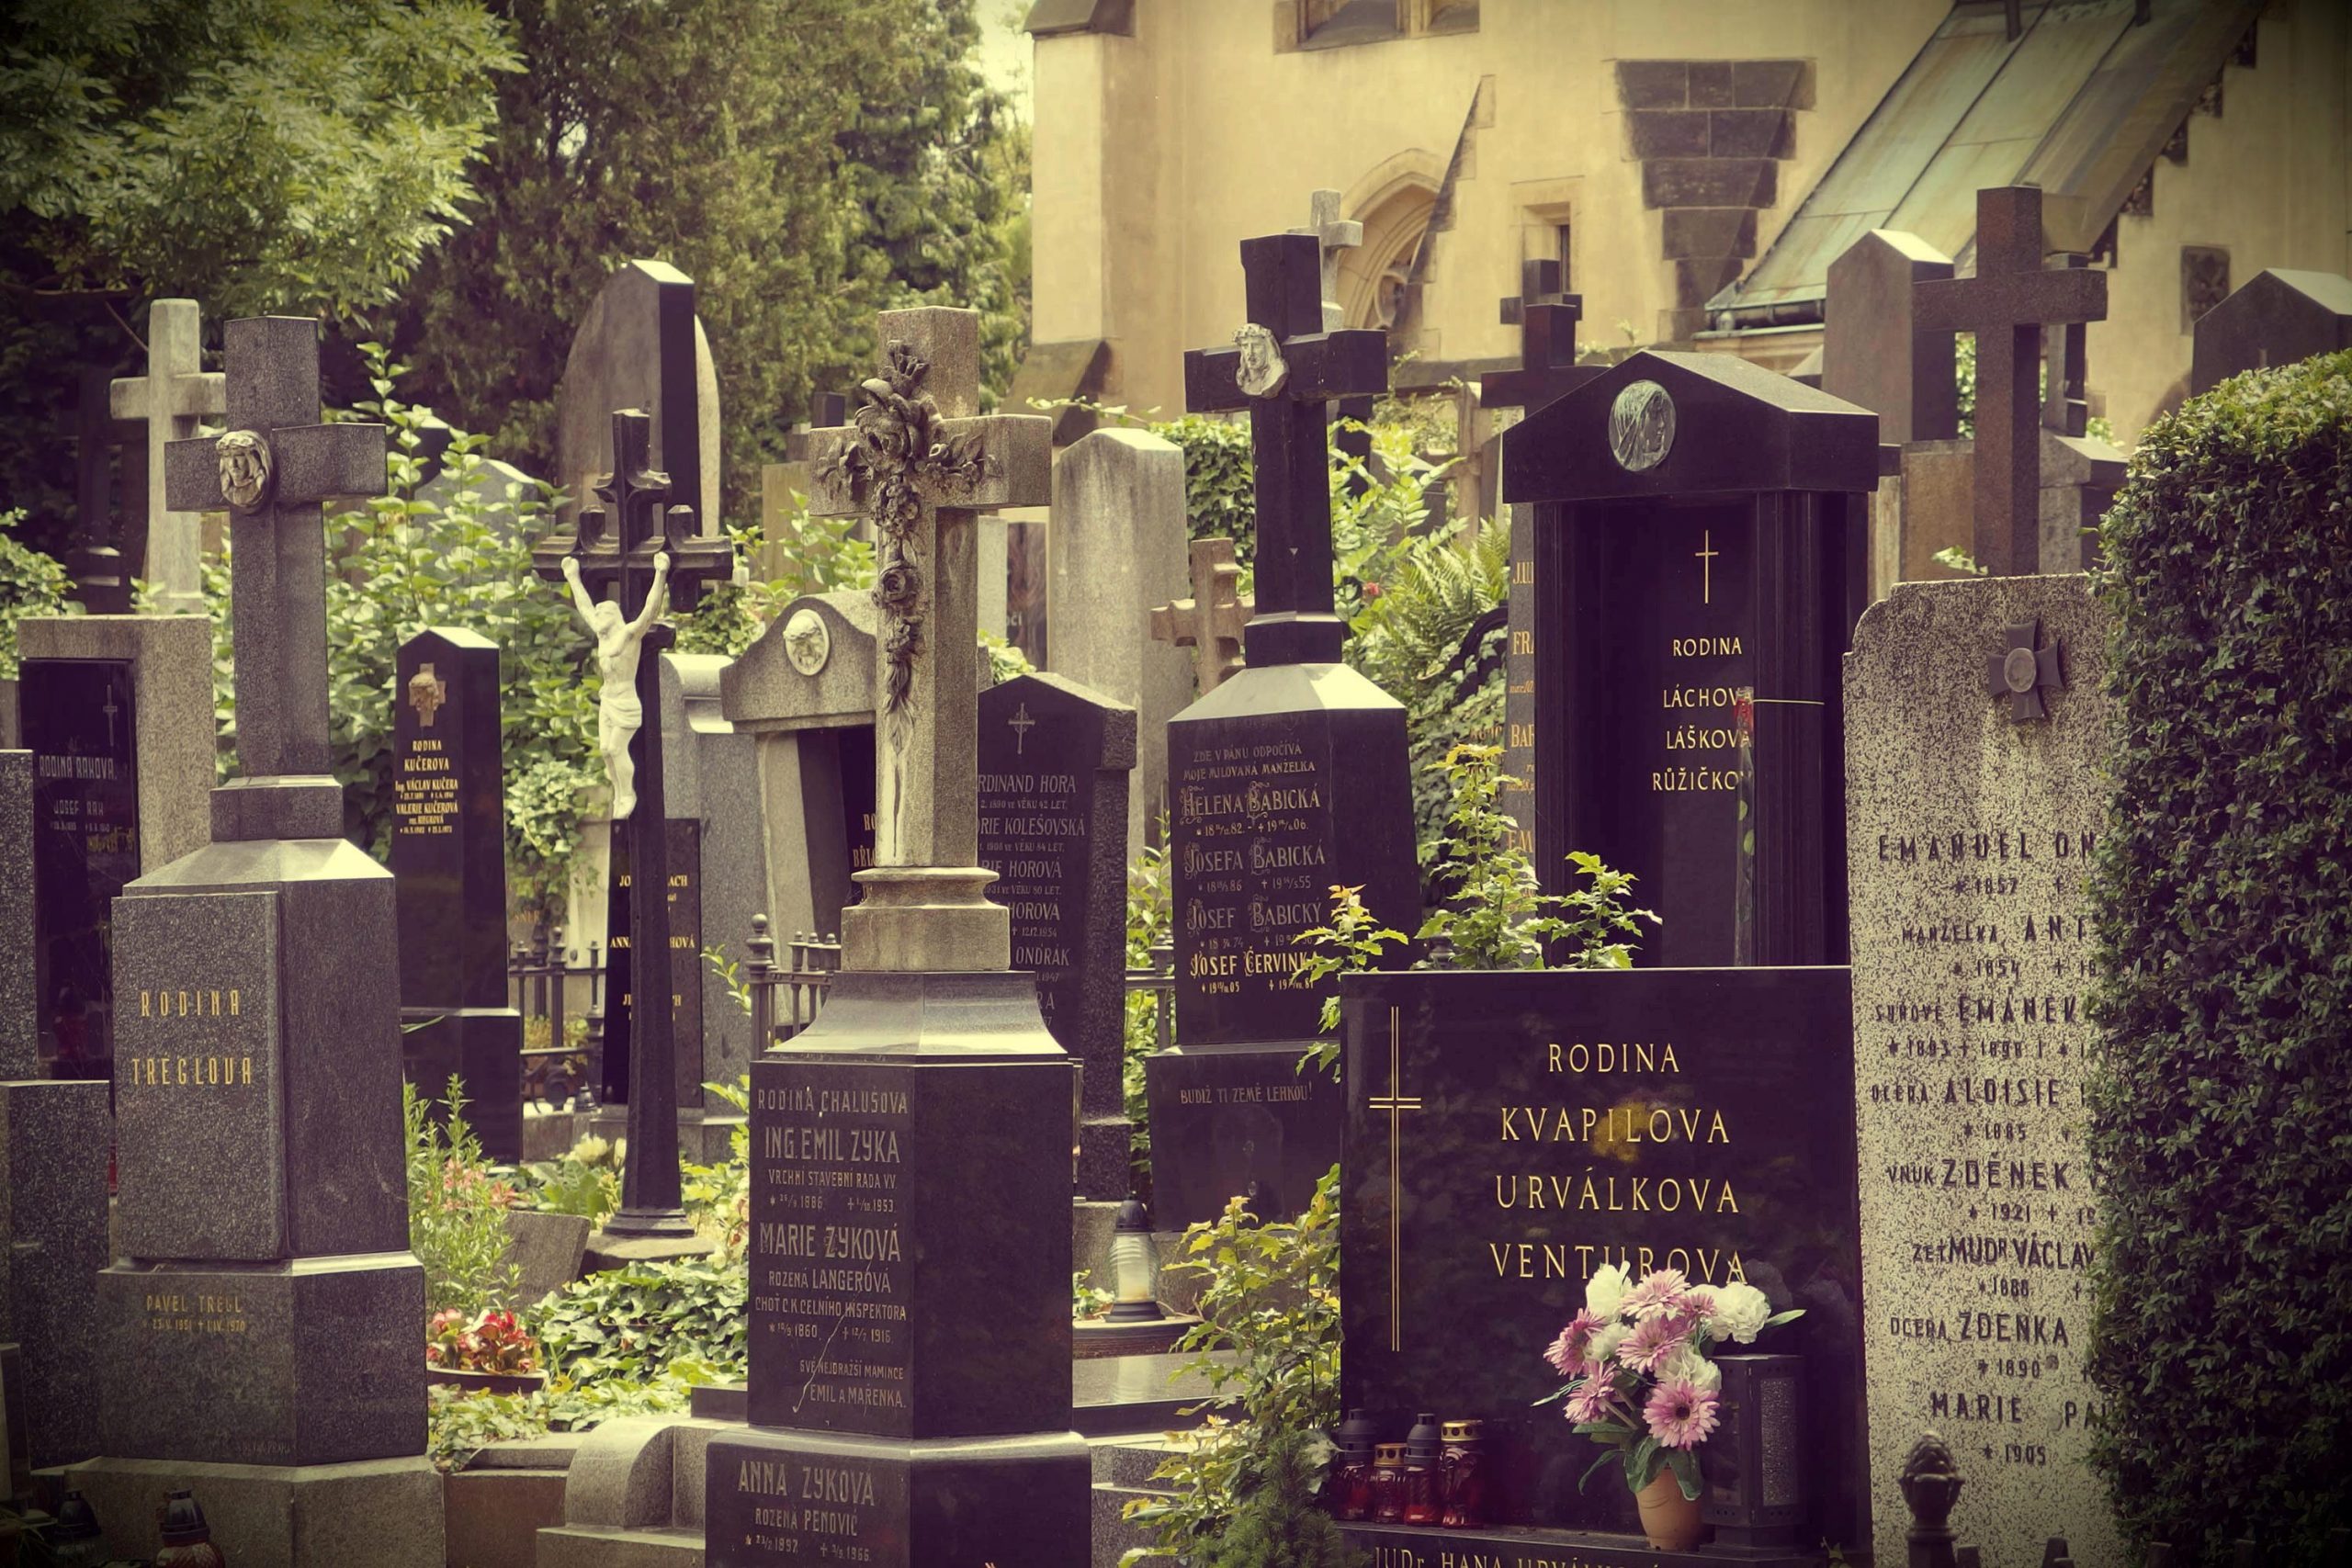 crowded cemetery with limited room between plots